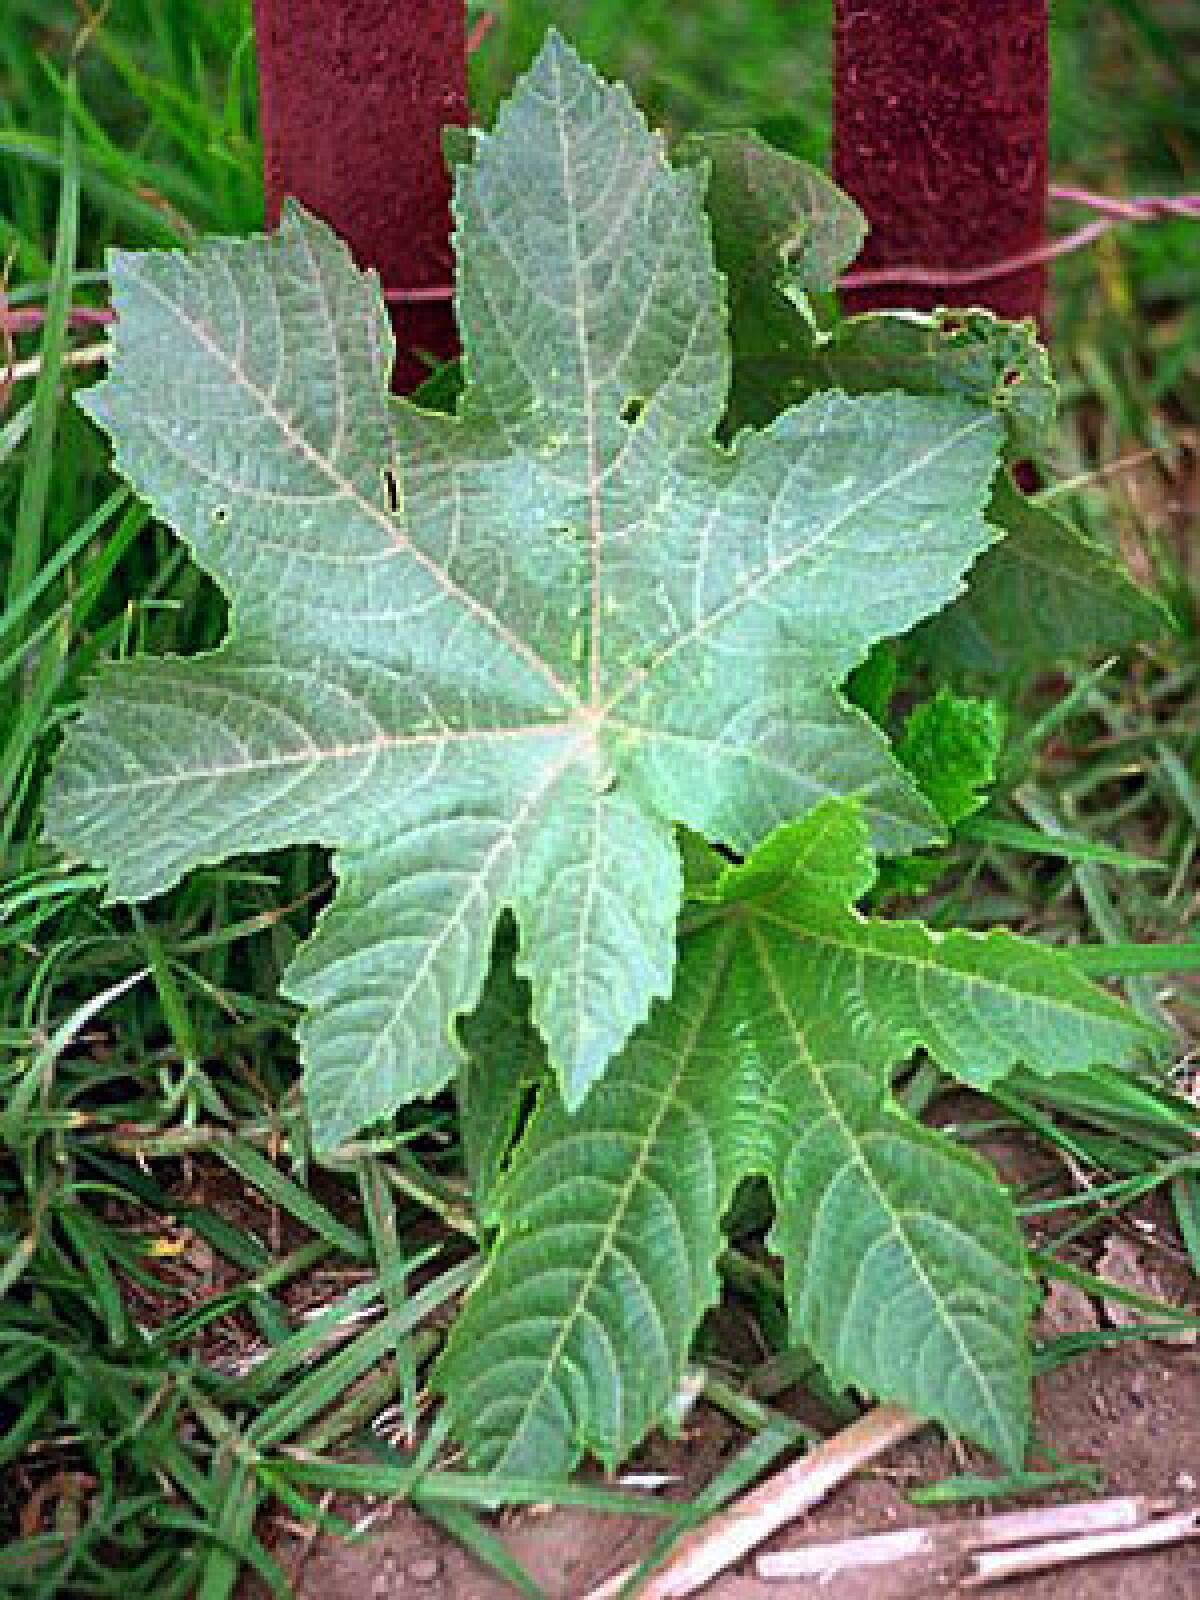 Castor bean plants are beautiful but produce deadly seeds that contain the poison ricin.